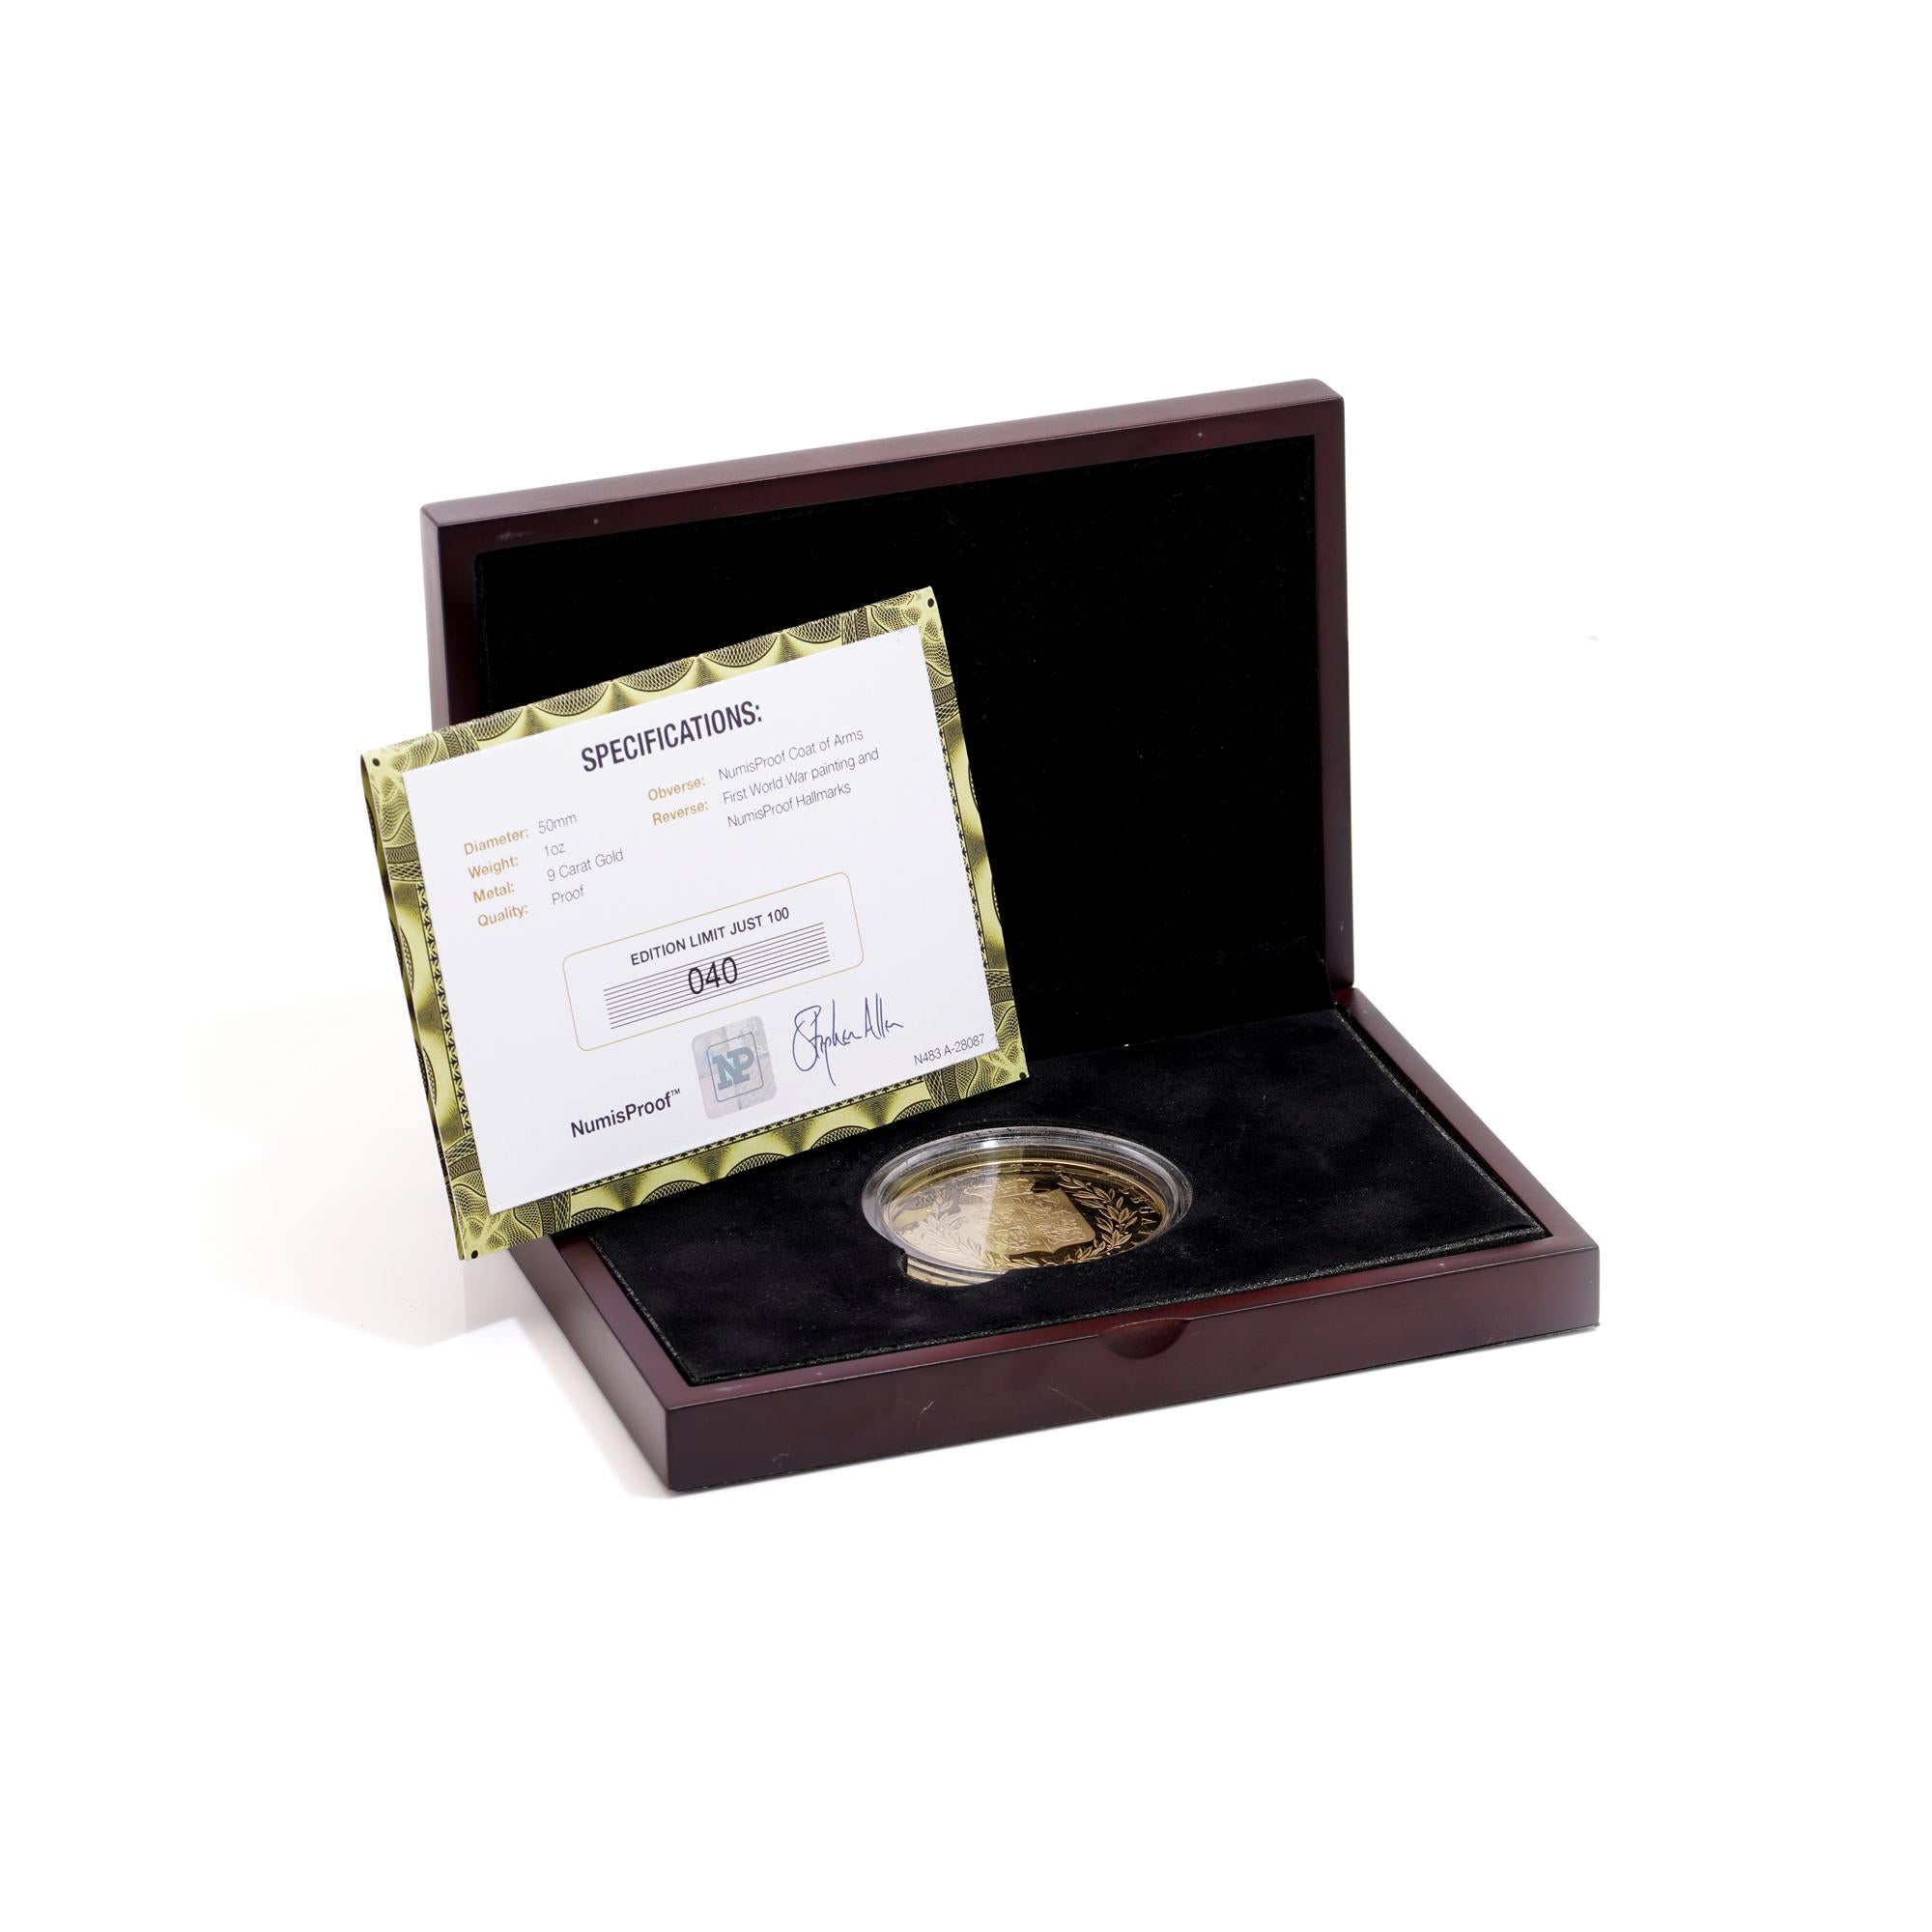 A 9ct gold proof coin, commemorating the First World War centenary, limited edition No 040 of 100, in a presentation case, issued by Numisproof, with a certificate, 50mm diameter, 1oz of 9ct gold.

Obverse: Numisproof Coat of Arms
Reversae: First